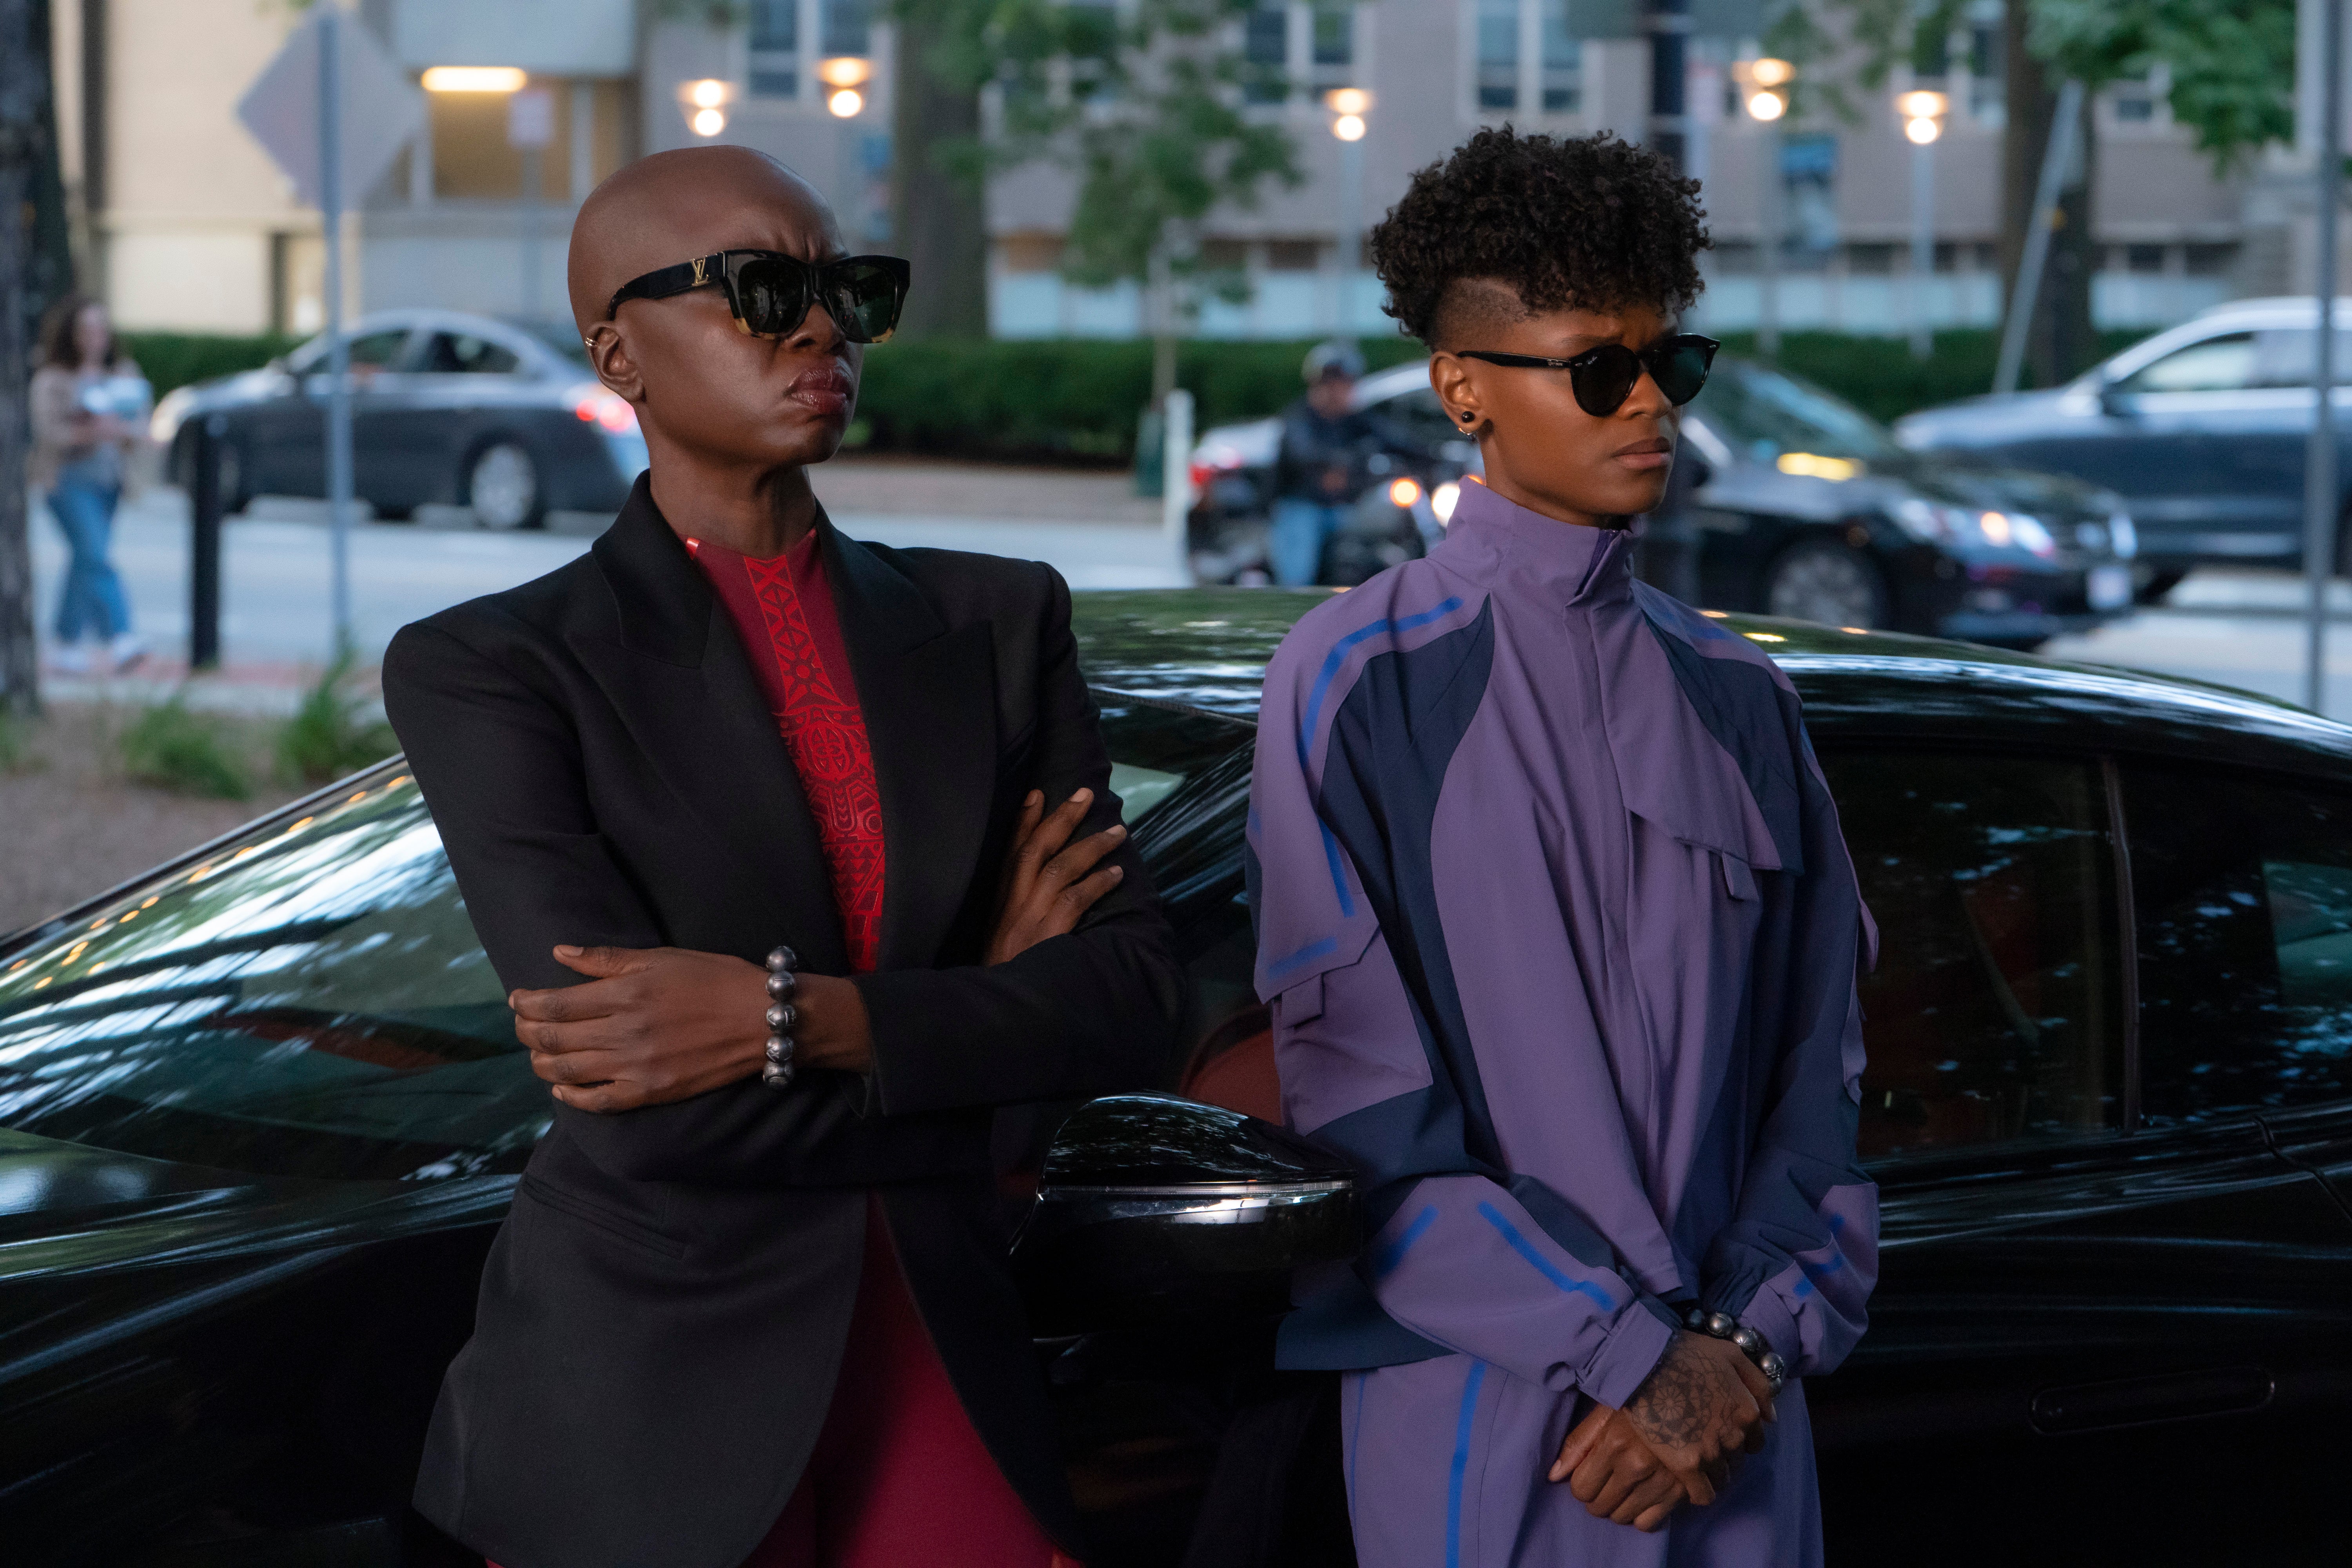 Both lean back against a black sedan, looking stylish in black sunglasses. Okoye wears a black blazer over more traditional red outfit befitting of one of Wakanda's dora milaje, while Shuri wears a futuristic purple tracksuit.